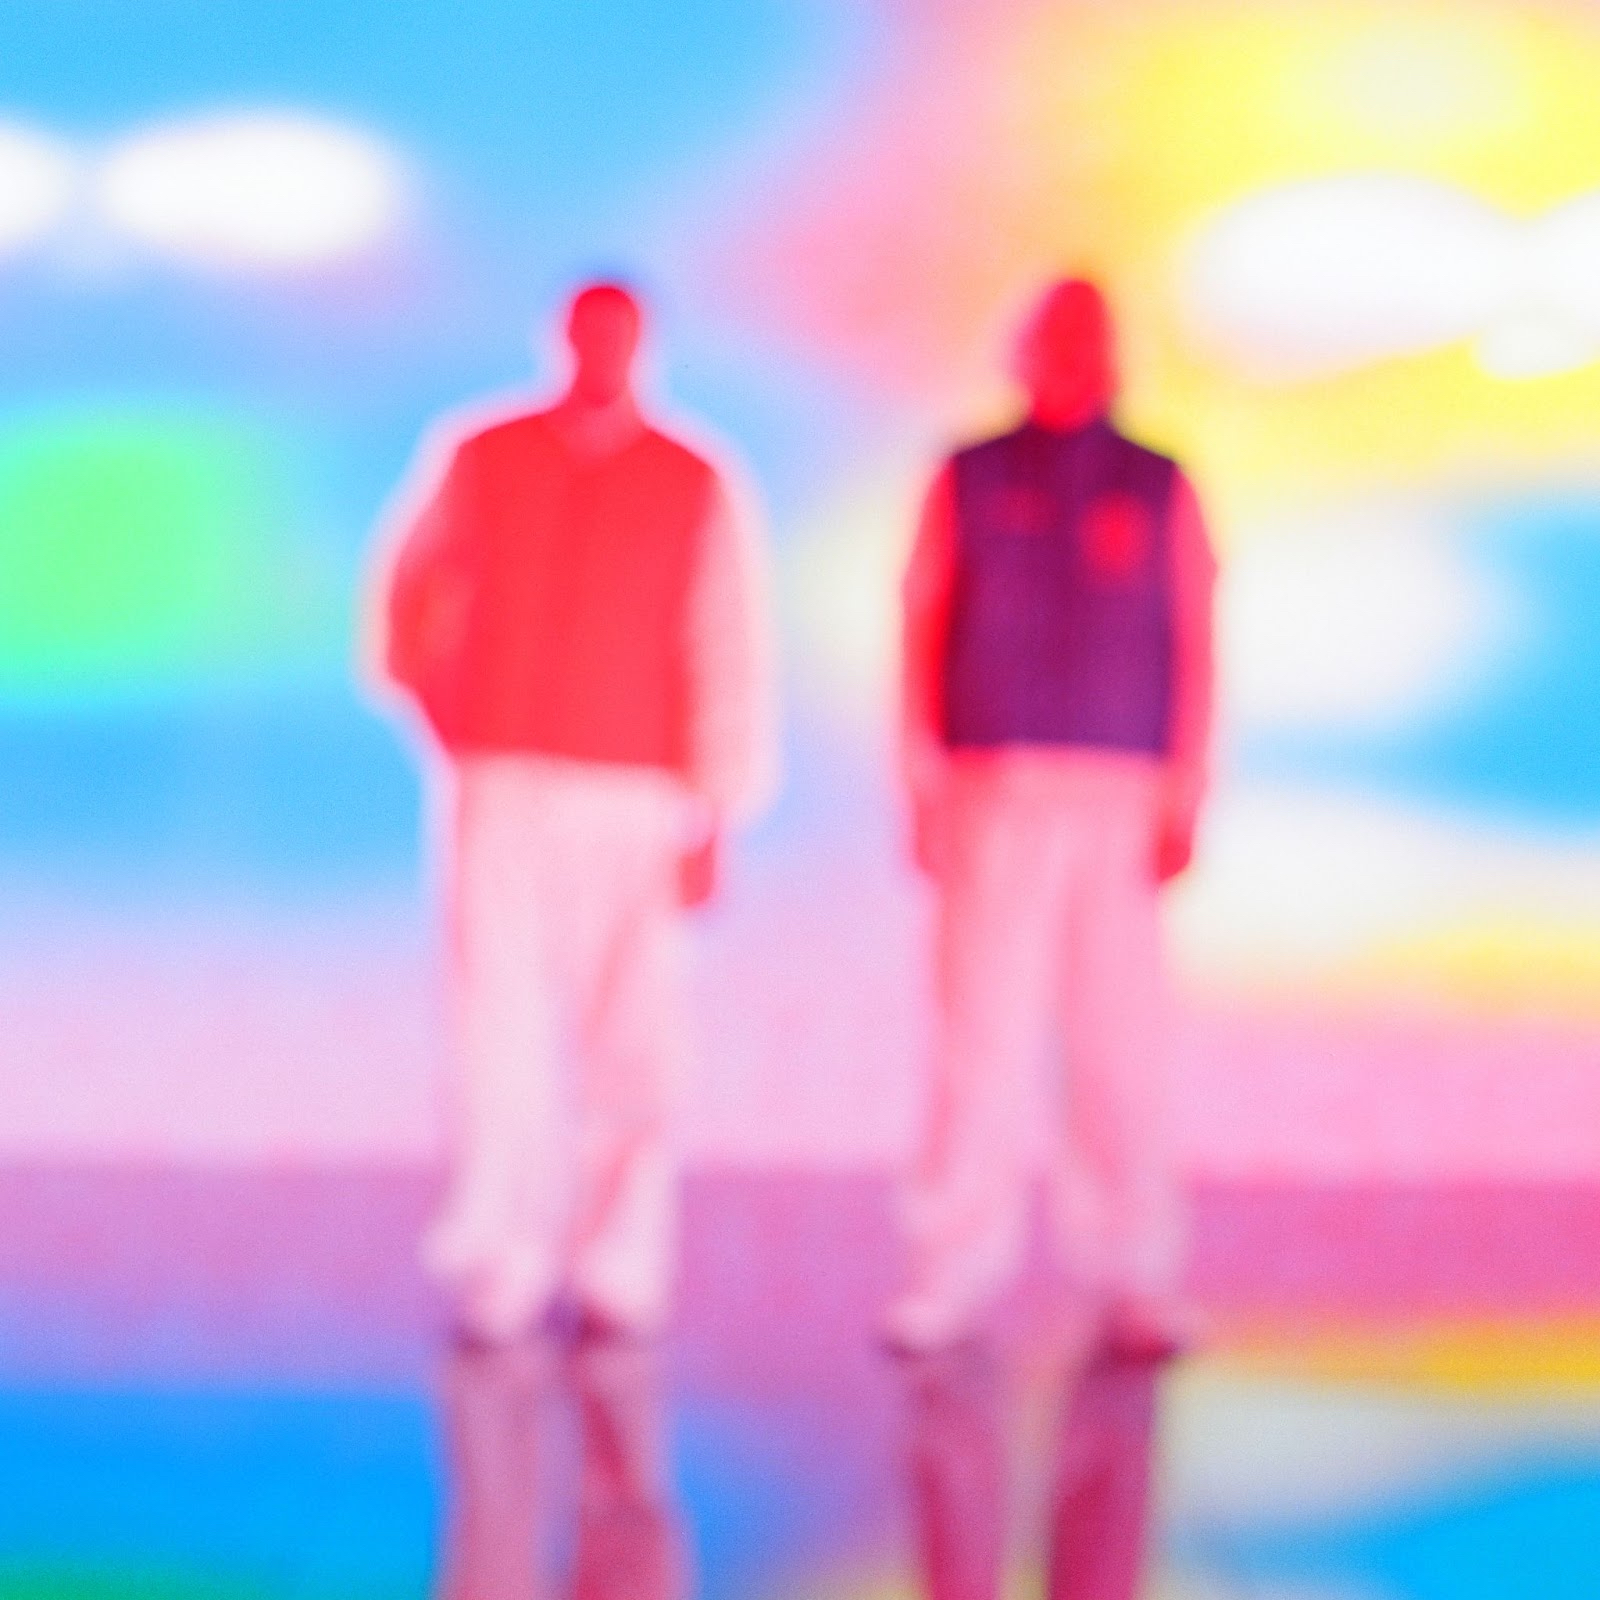 LOS ANGELES INDIE-DANCE DUO NEIL FRANCES RELEASE NEW SINGLE AND MUSIC VIDEO “GIMME” OUT TODAY